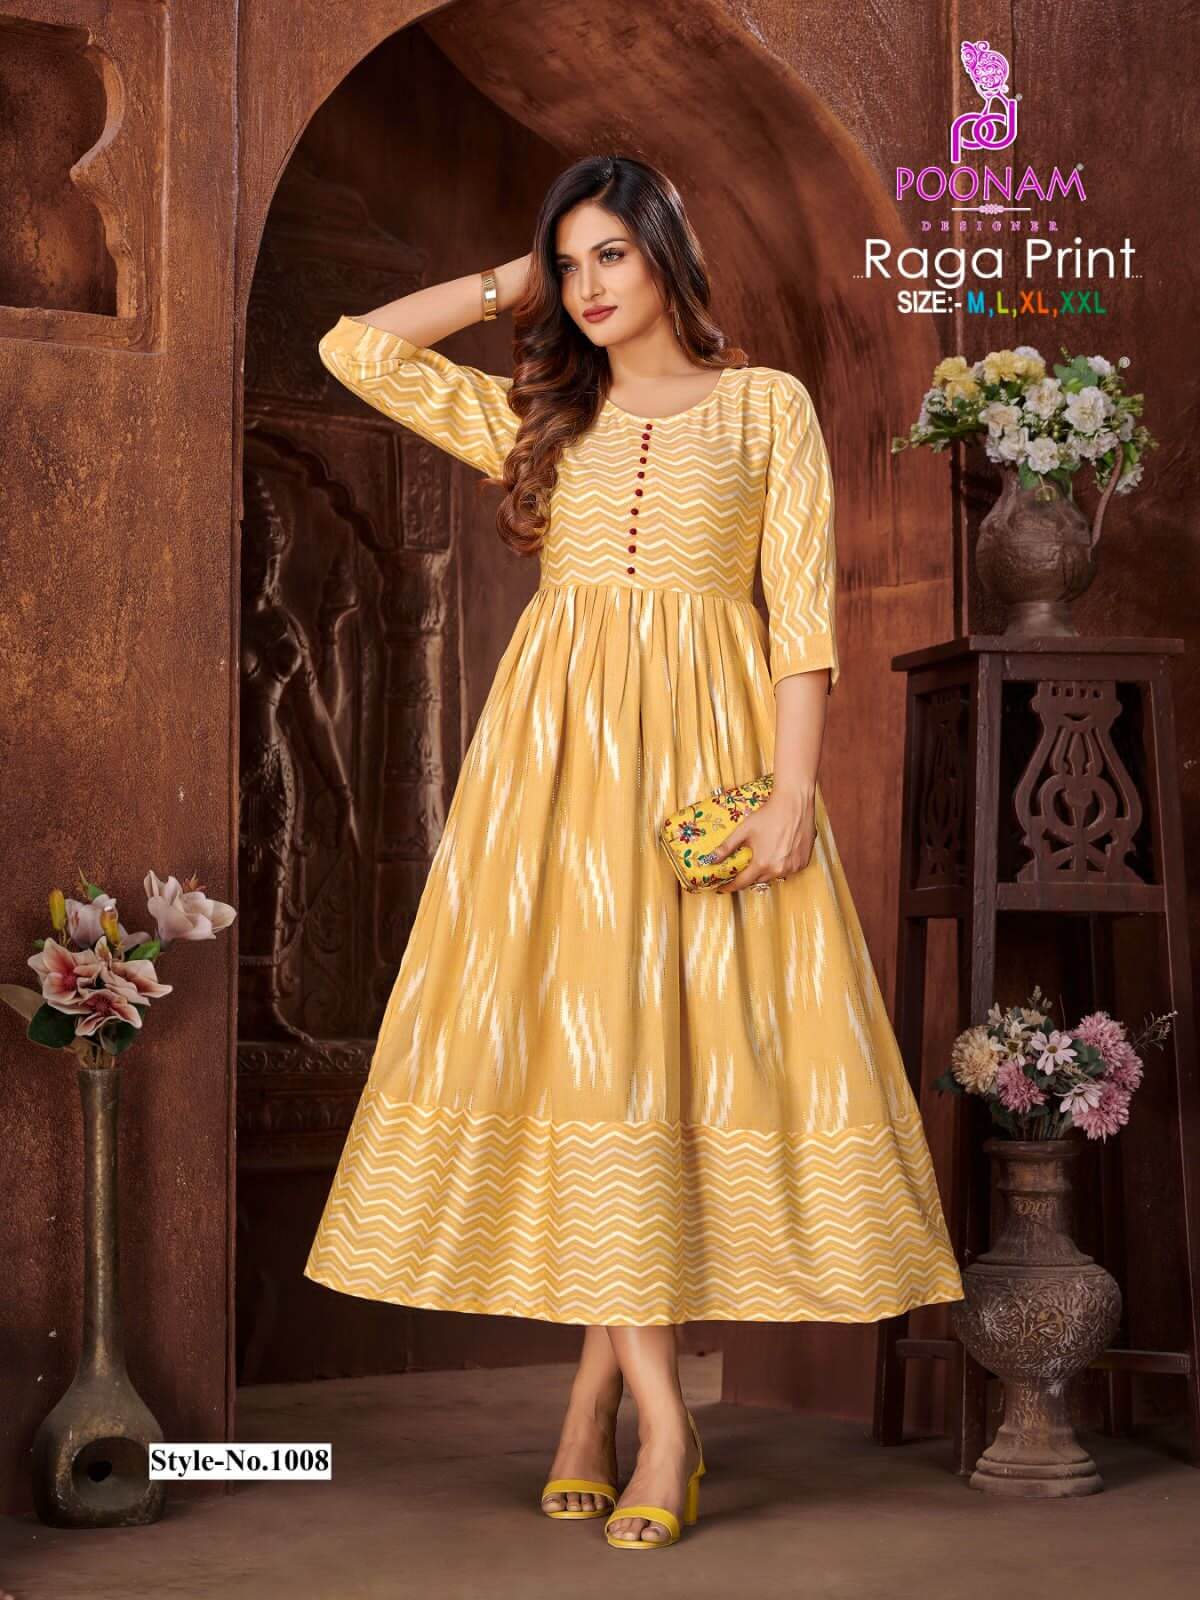 Poonam Raga Print Gowns Catalog collection 12